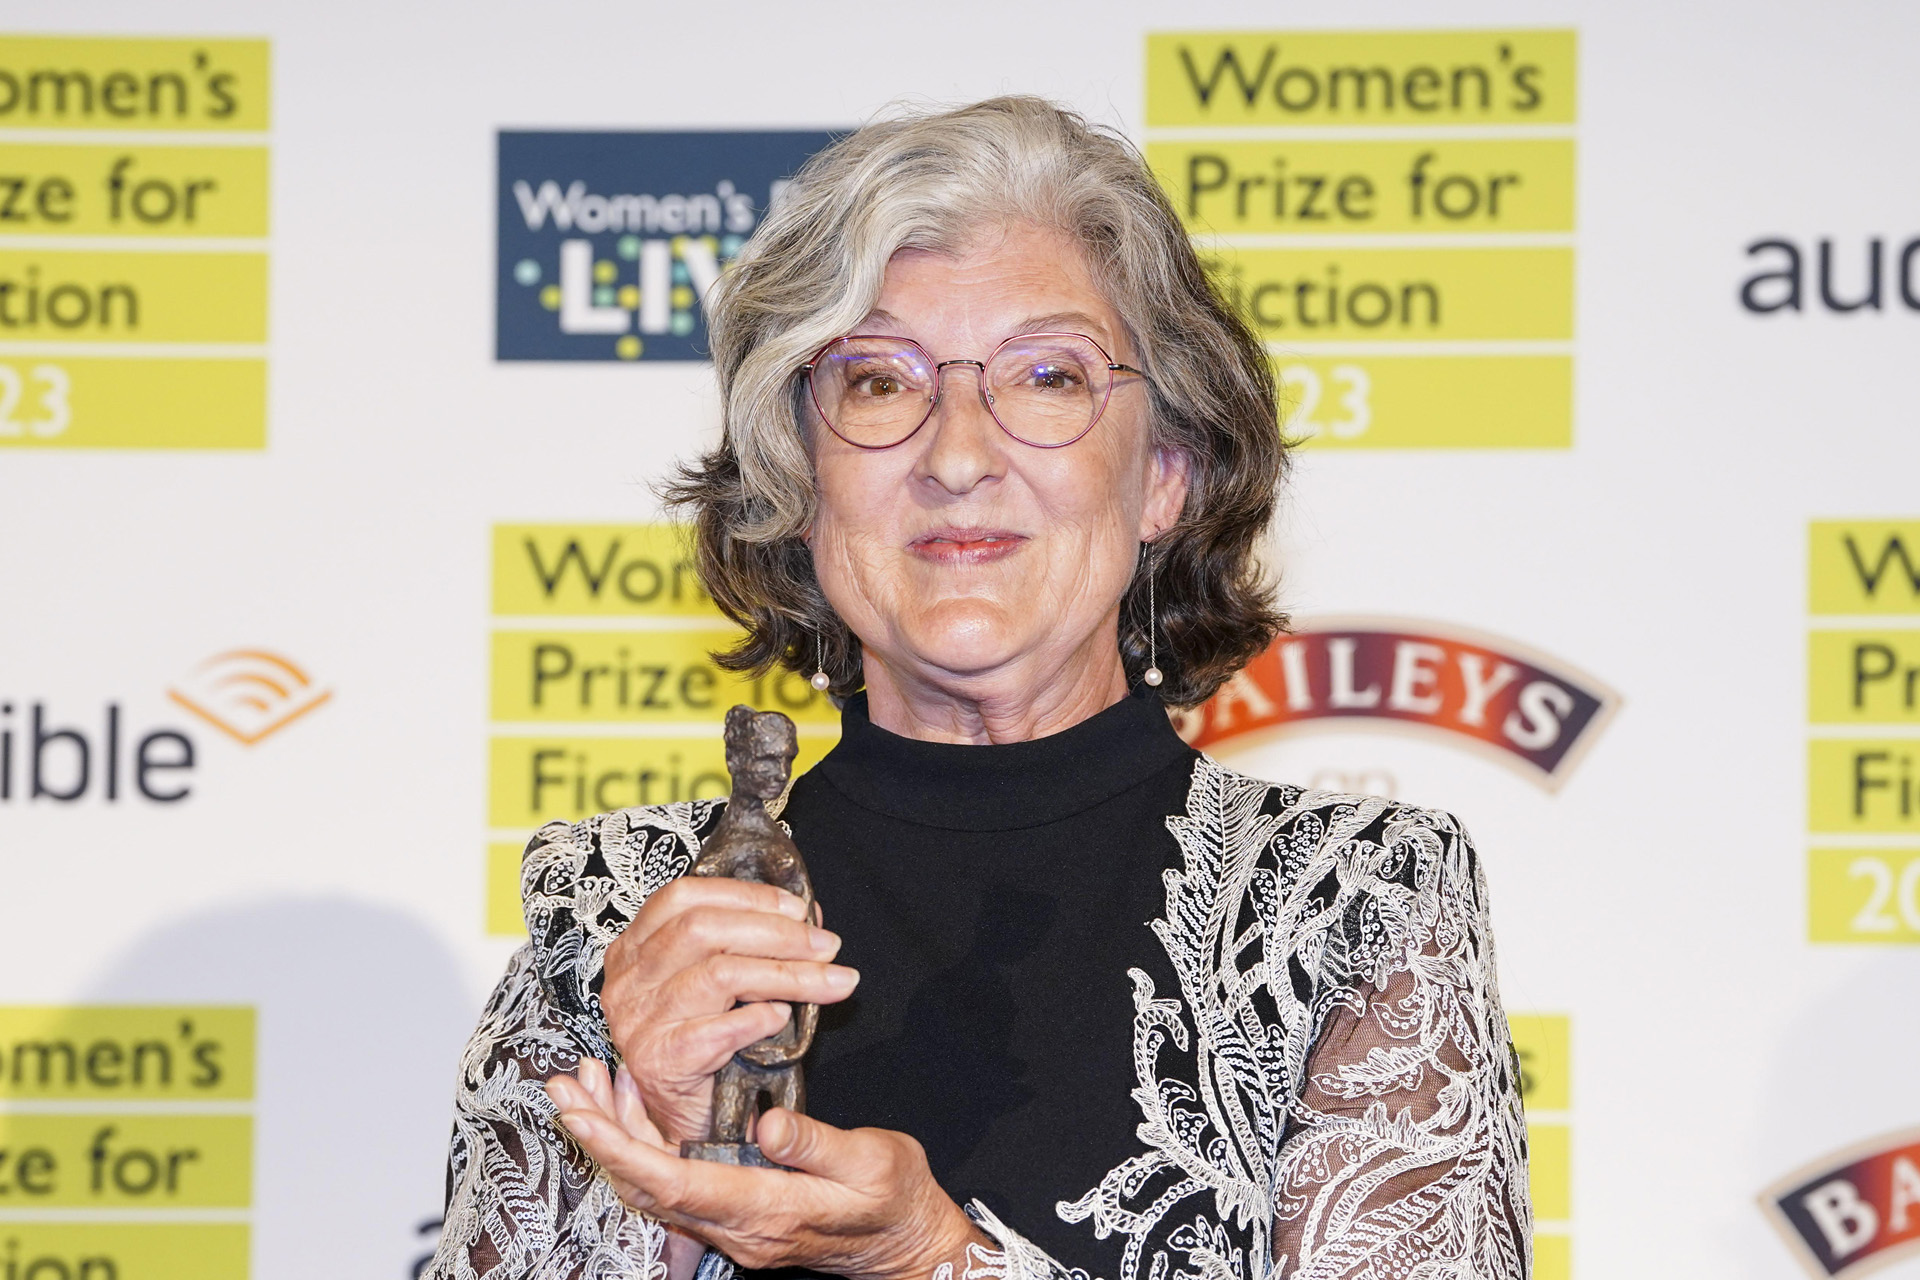 Barbara Kingsolver, author of Demon Copperhead is announced as the winner of the 2023 Women's Prize For Fiction